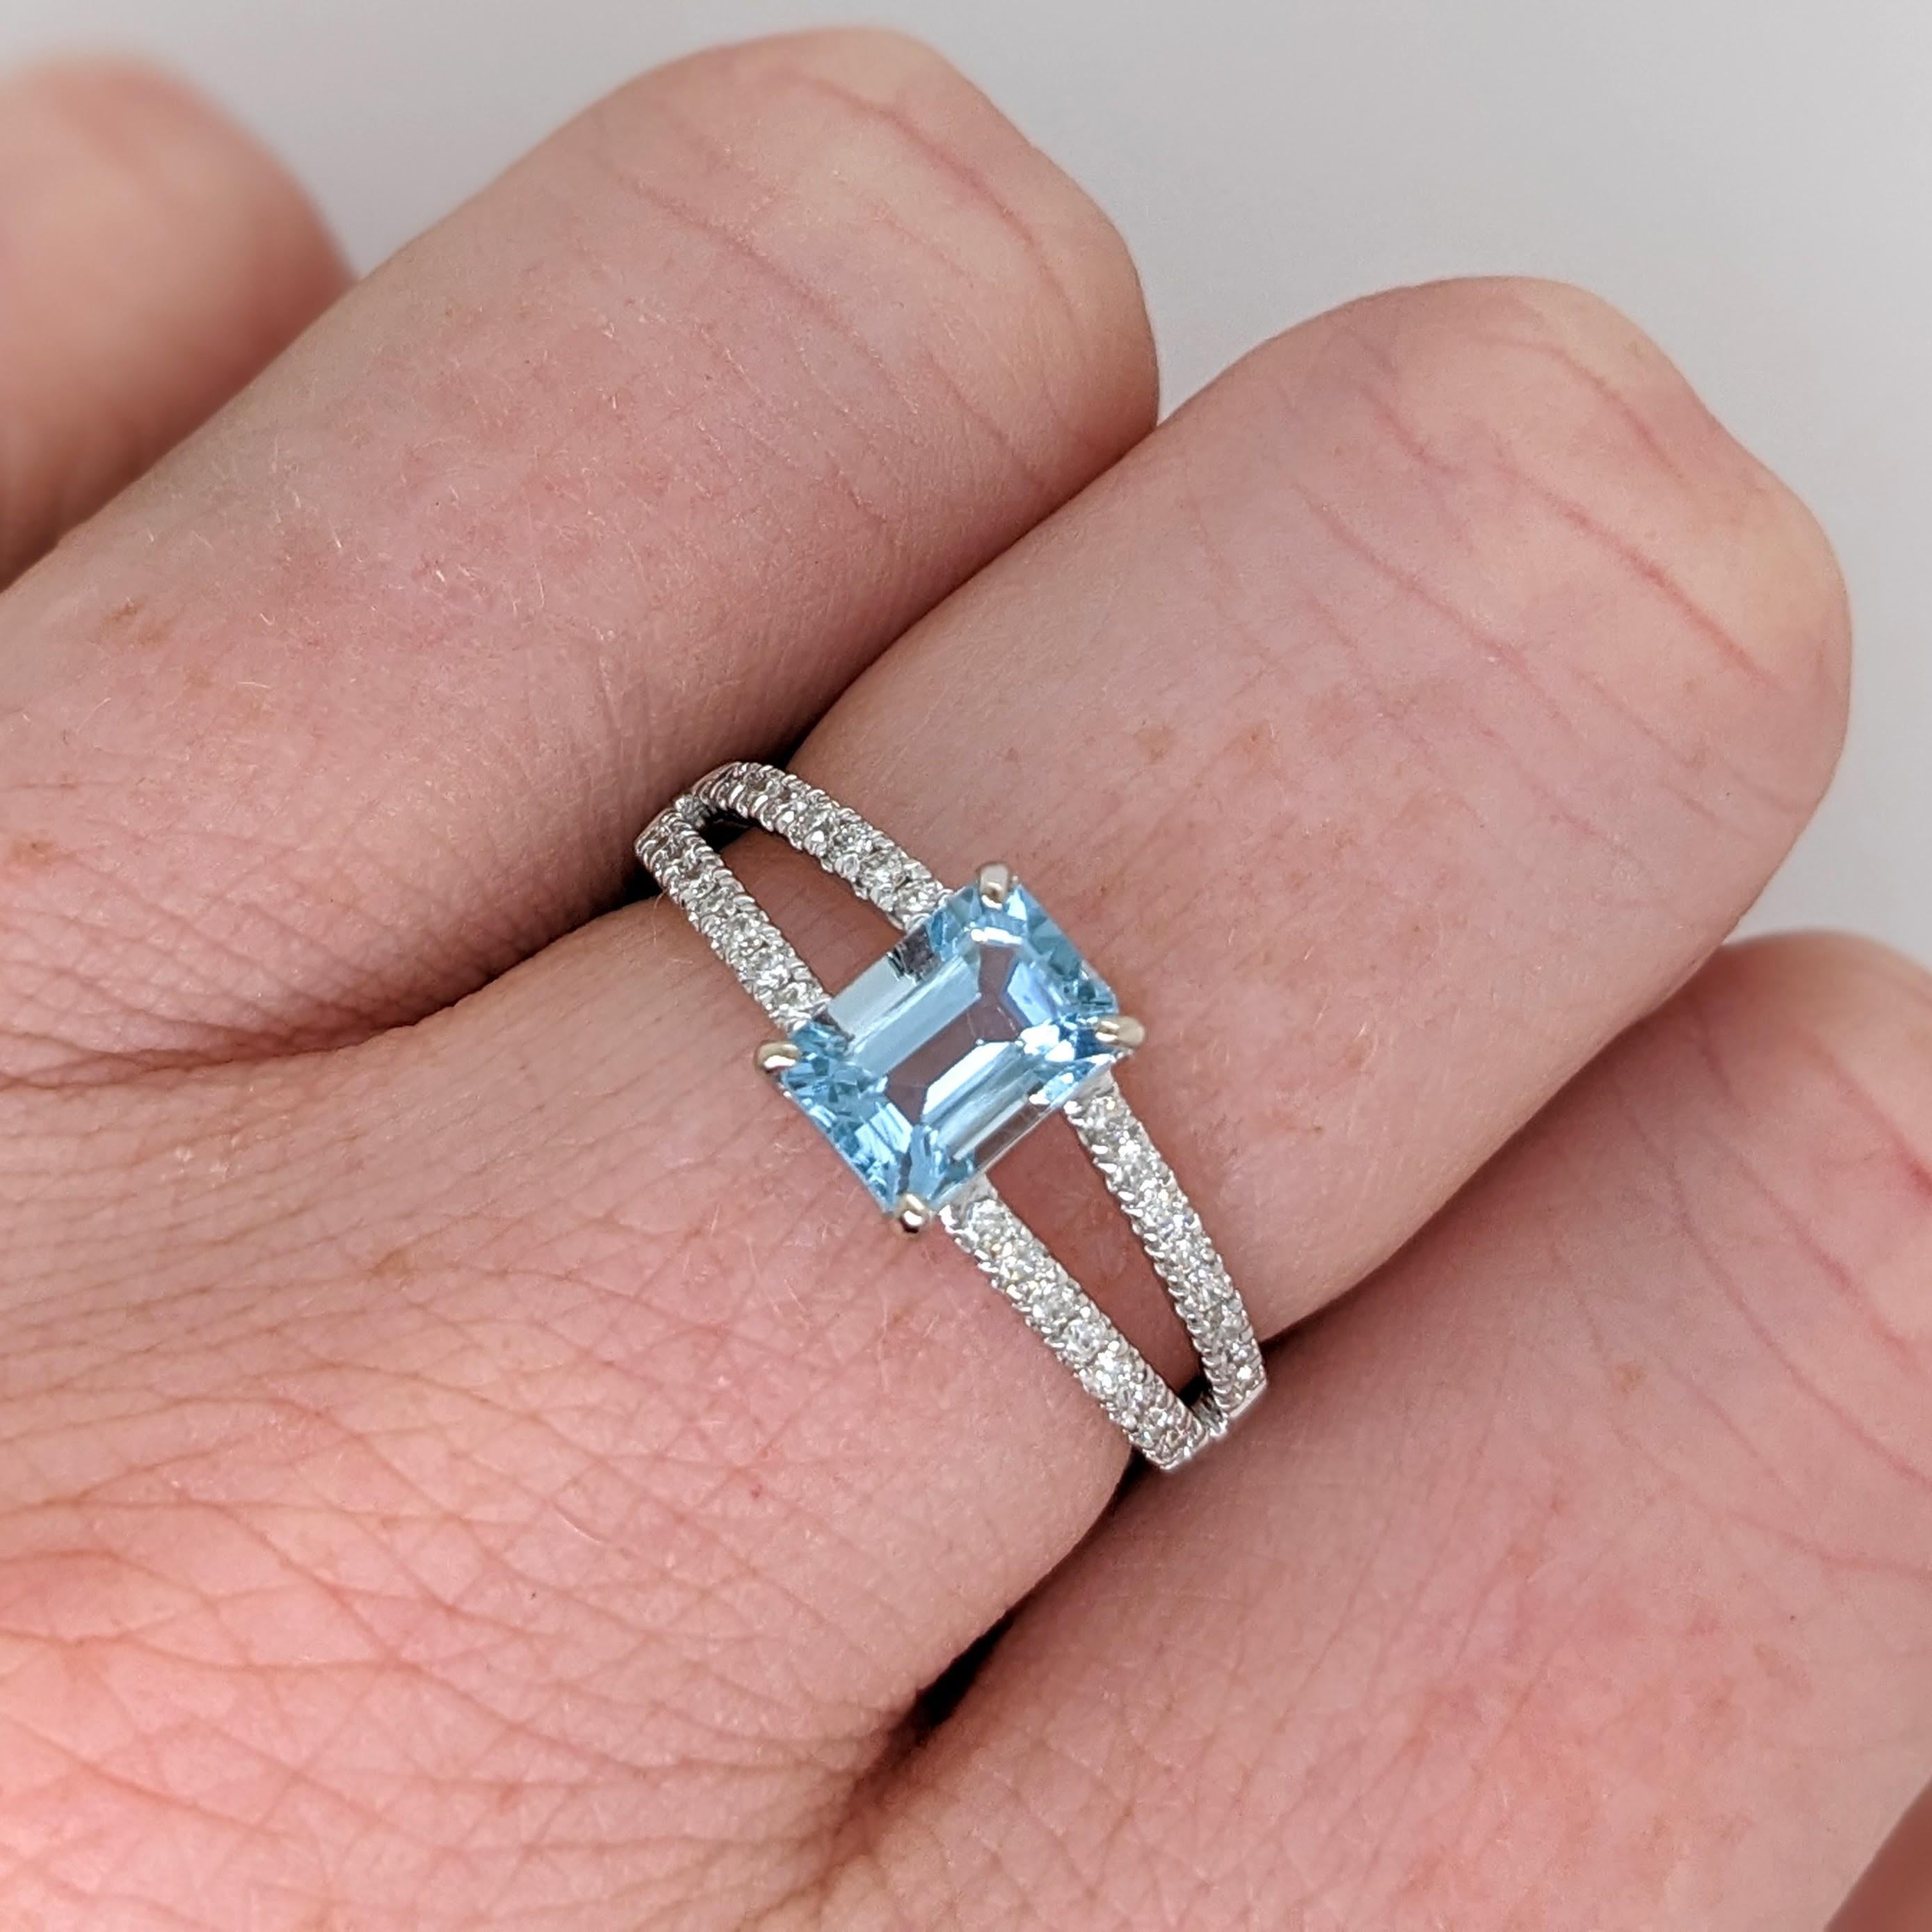 This beautiful ring features a 0.94ct emerald cut aquamarine with natural earth-mined diamonds set in solid 14k gold. The split shank design creates a visually captivating effect making it the perfect choice for both everyday wear and special